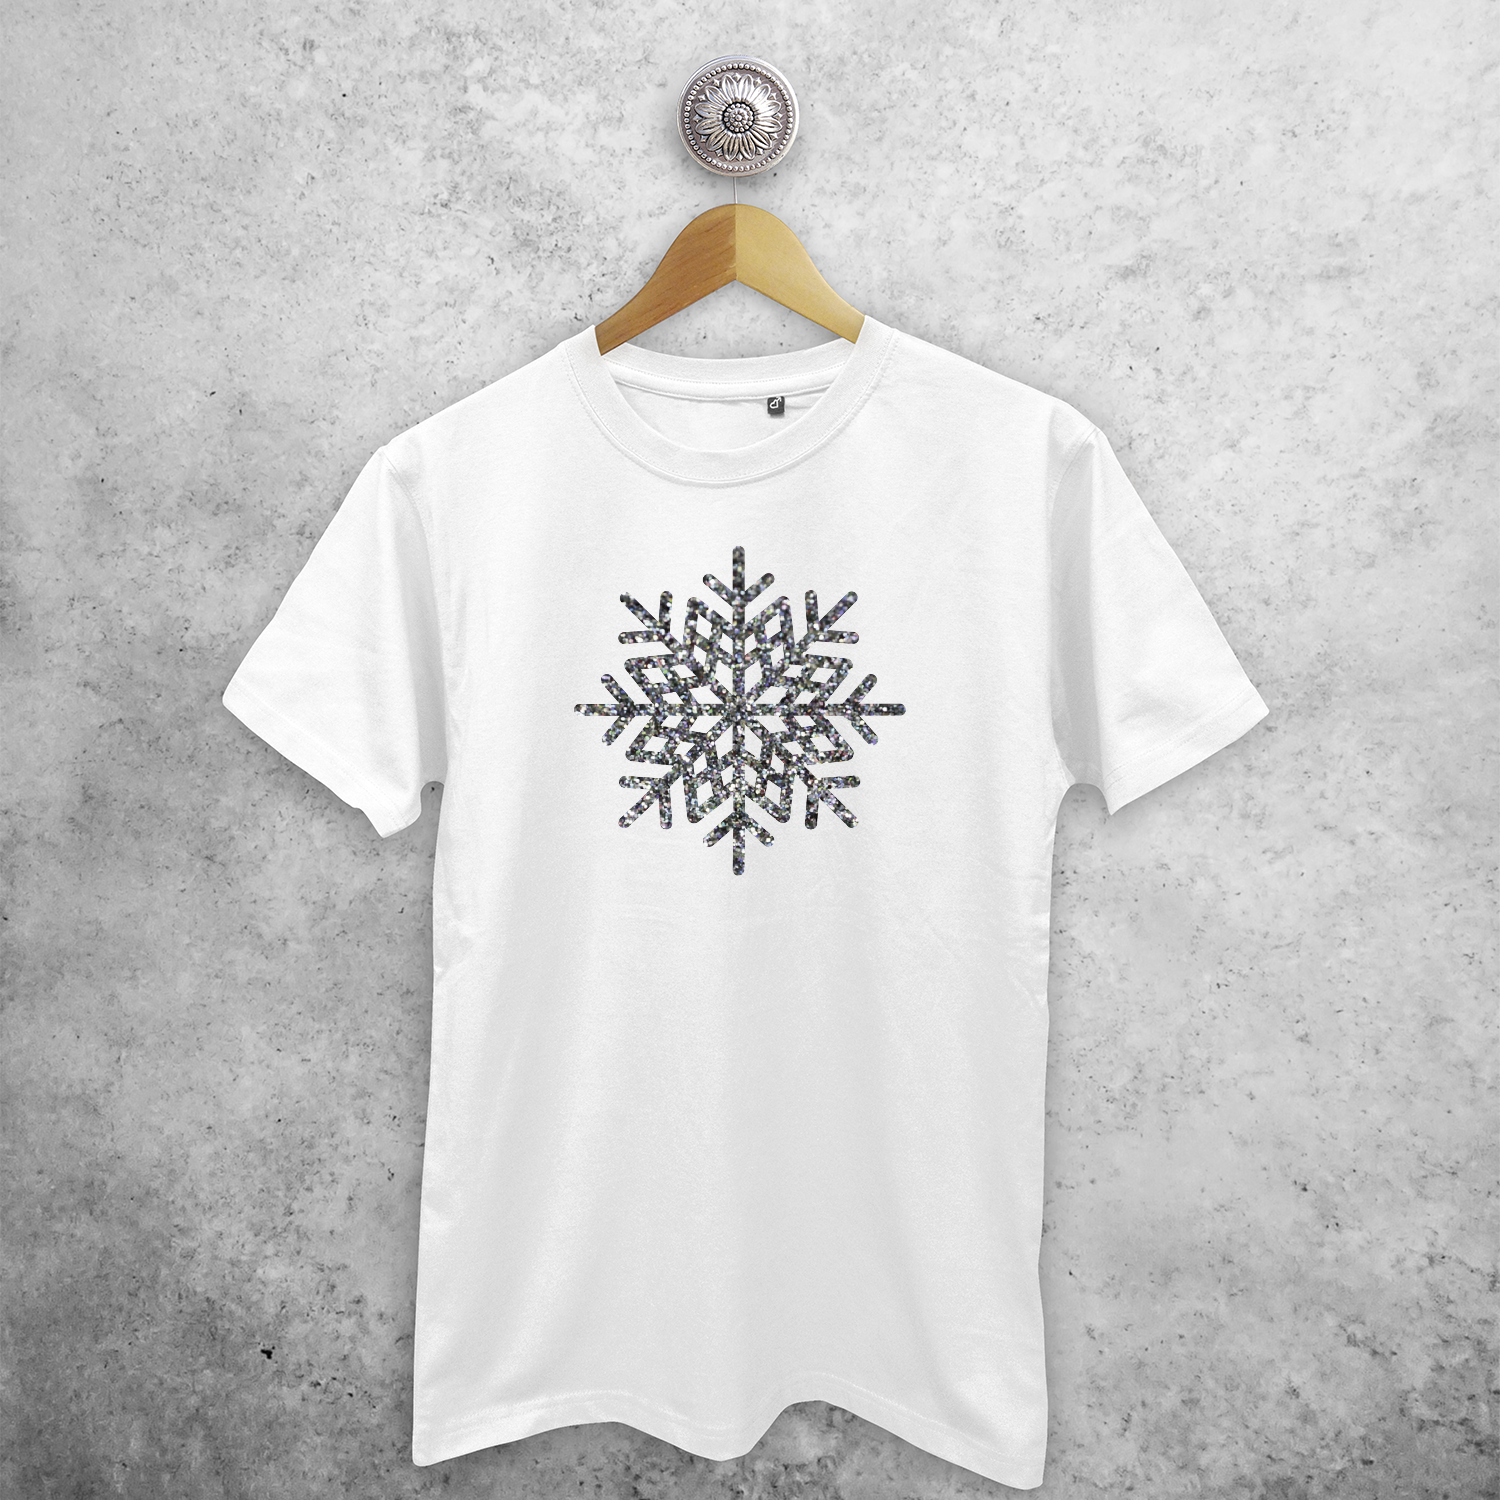 Adult shirt with short sleeves, with glitter snow star print by KMLeon.